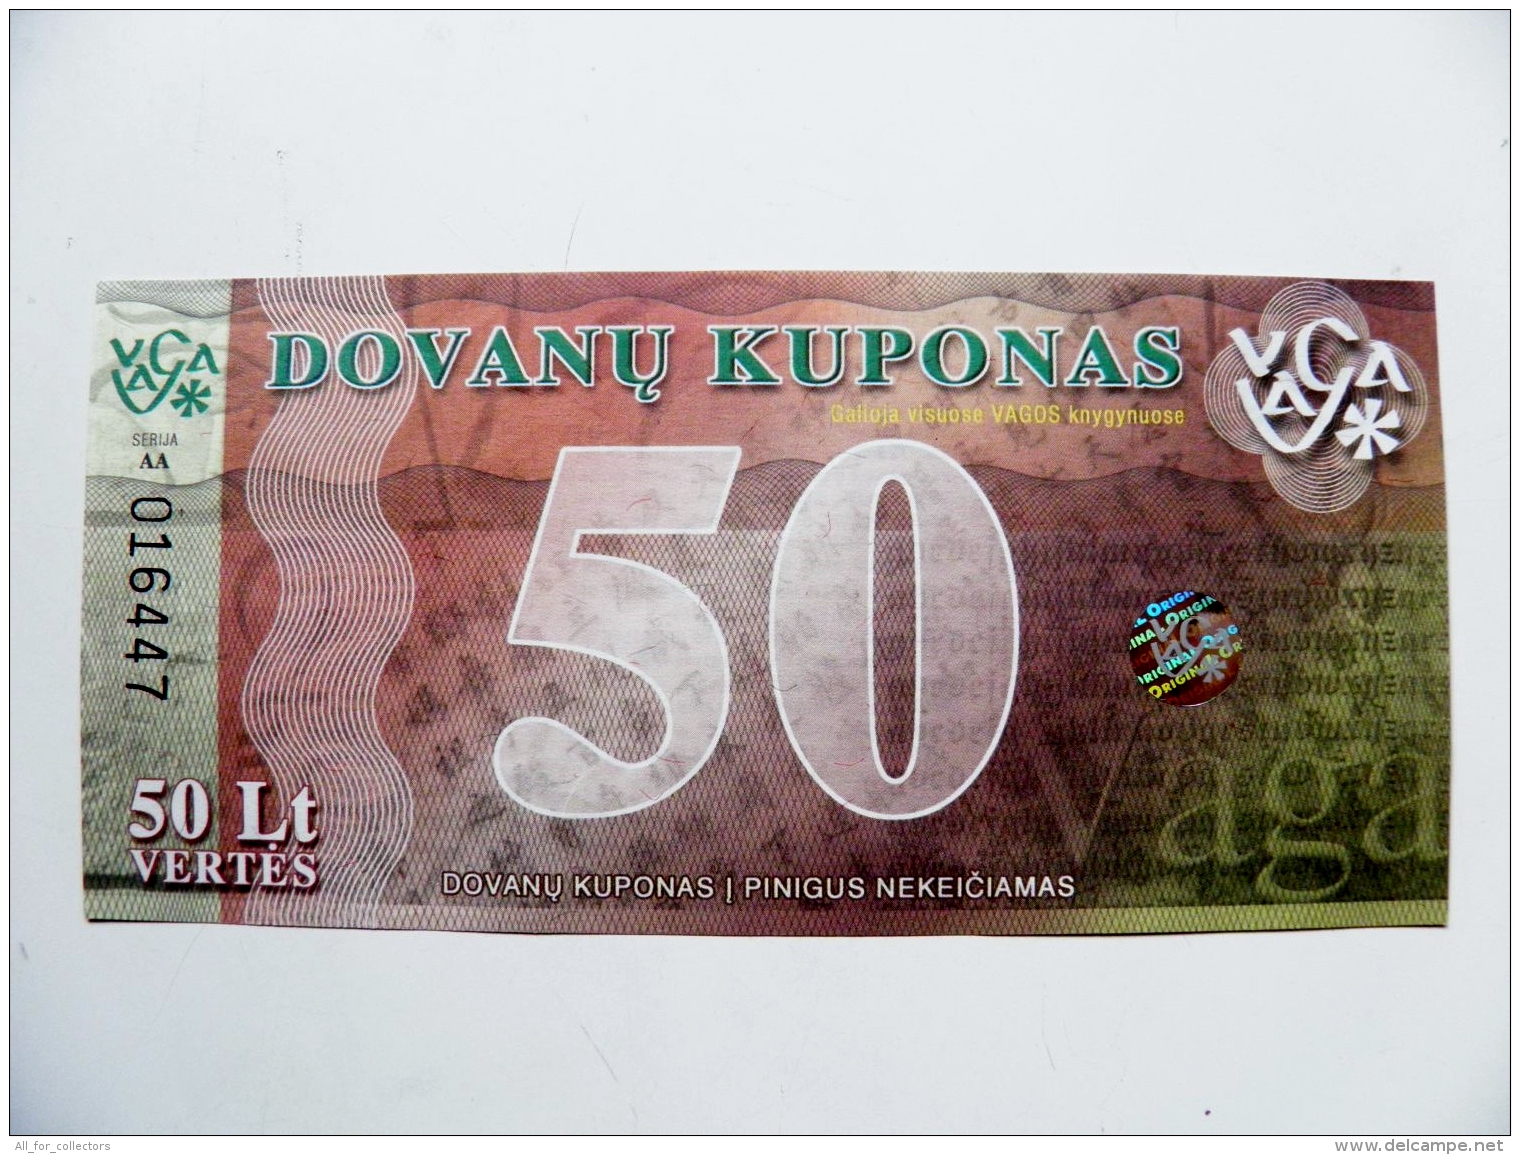 Uns Banknote From Lithuania 2008 50 Lt. Gift Voucher At The Bookstore Hologram Vaga - Lithuania